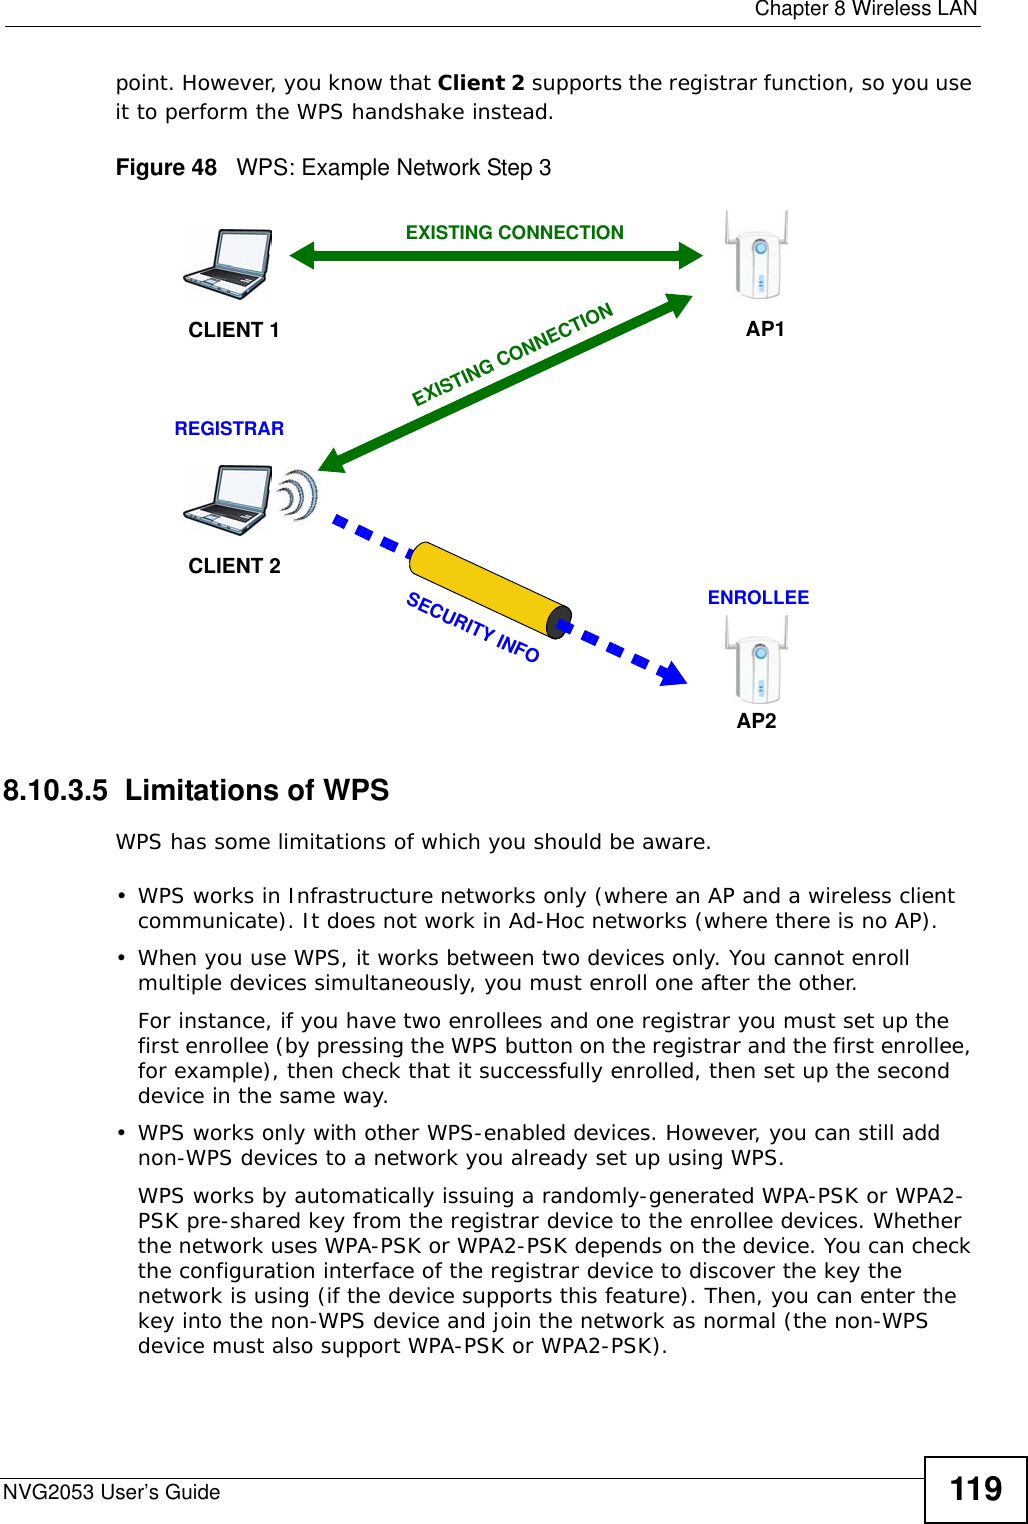  Chapter 8 Wireless LANNVG2053 User’s Guide 119point. However, you know that Client 2 supports the registrar function, so you use it to perform the WPS handshake instead.Figure 48   WPS: Example Network Step 38.10.3.5  Limitations of WPSWPS has some limitations of which you should be aware. • WPS works in Infrastructure networks only (where an AP and a wireless client communicate). It does not work in Ad-Hoc networks (where there is no AP).• When you use WPS, it works between two devices only. You cannot enroll multiple devices simultaneously, you must enroll one after the other. For instance, if you have two enrollees and one registrar you must set up the first enrollee (by pressing the WPS button on the registrar and the first enrollee, for example), then check that it successfully enrolled, then set up the second device in the same way.• WPS works only with other WPS-enabled devices. However, you can still add non-WPS devices to a network you already set up using WPS. WPS works by automatically issuing a randomly-generated WPA-PSK or WPA2-PSK pre-shared key from the registrar device to the enrollee devices. Whether the network uses WPA-PSK or WPA2-PSK depends on the device. You can check the configuration interface of the registrar device to discover the key the network is using (if the device supports this feature). Then, you can enter the key into the non-WPS device and join the network as normal (the non-WPS device must also support WPA-PSK or WPA2-PSK).CLIENT 1 AP1REGISTRARCLIENT 2EXISTING CONNECTIONSECURITY INFOENROLLEEAP2EXISTING CONNECTION